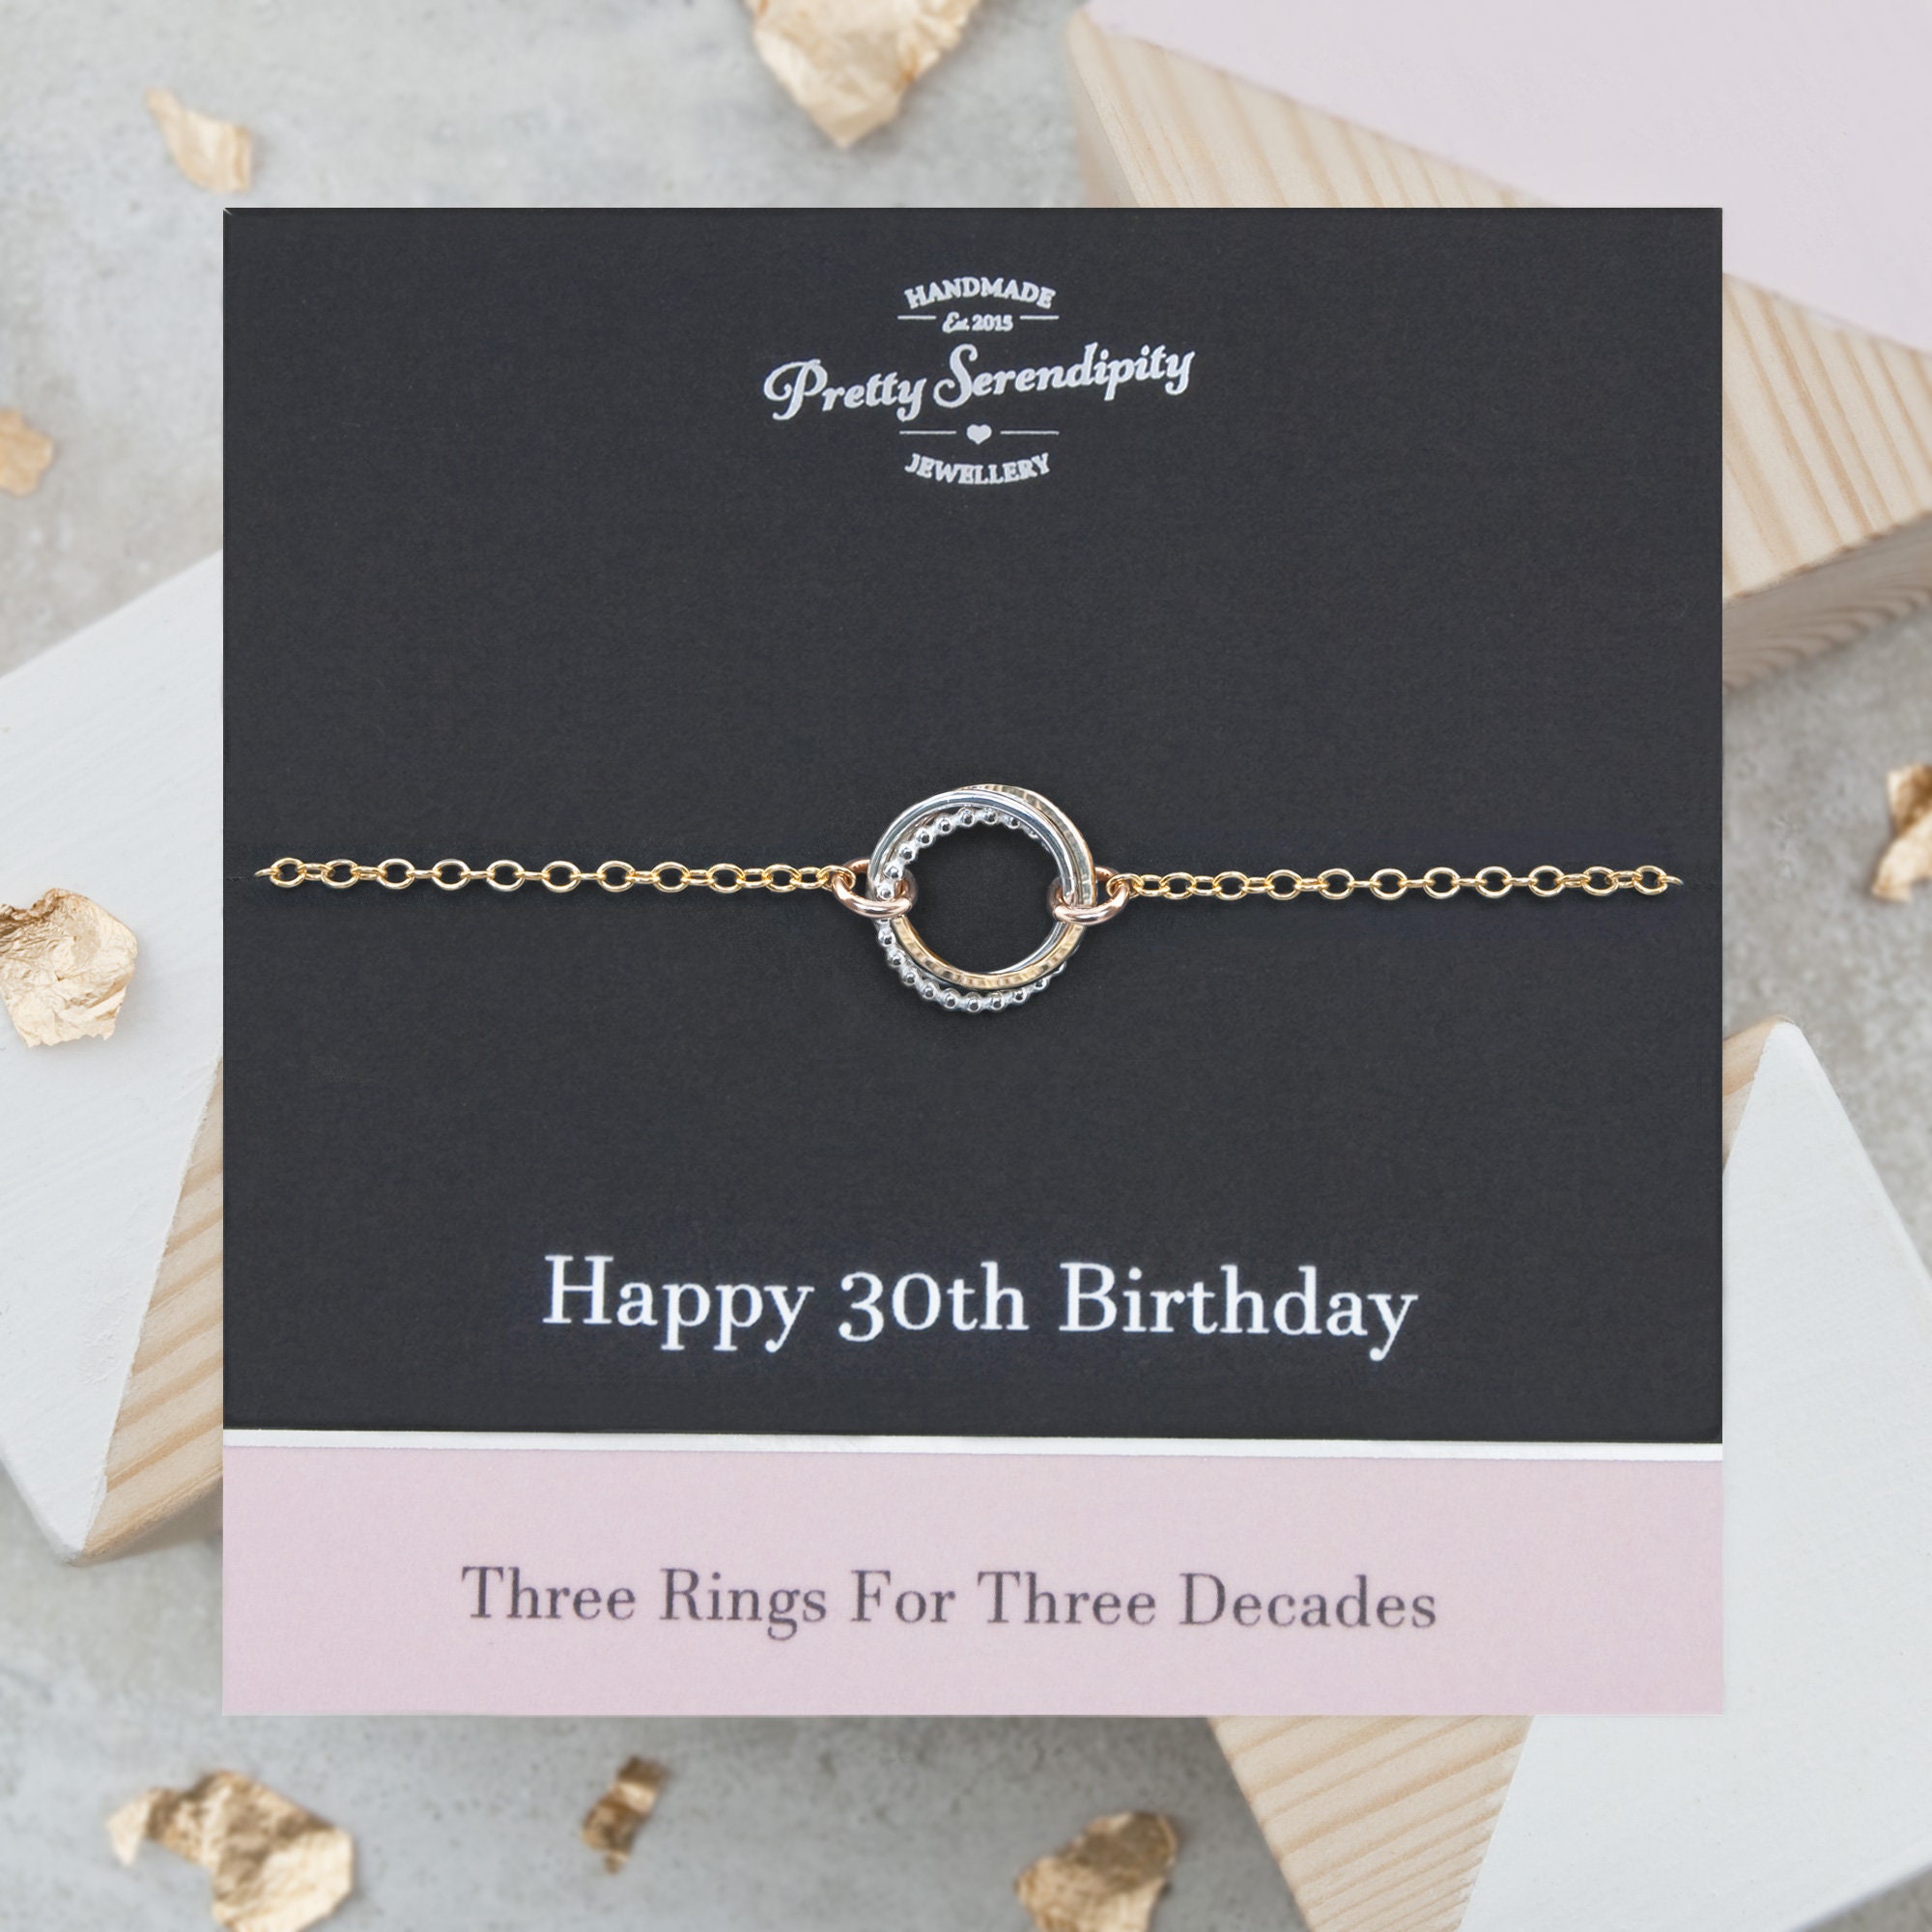 30Th Birthday Mixed Metal Bracelet - 3 Rings For Decades, Gifts Her, Silver & 14Ct Gold Fill